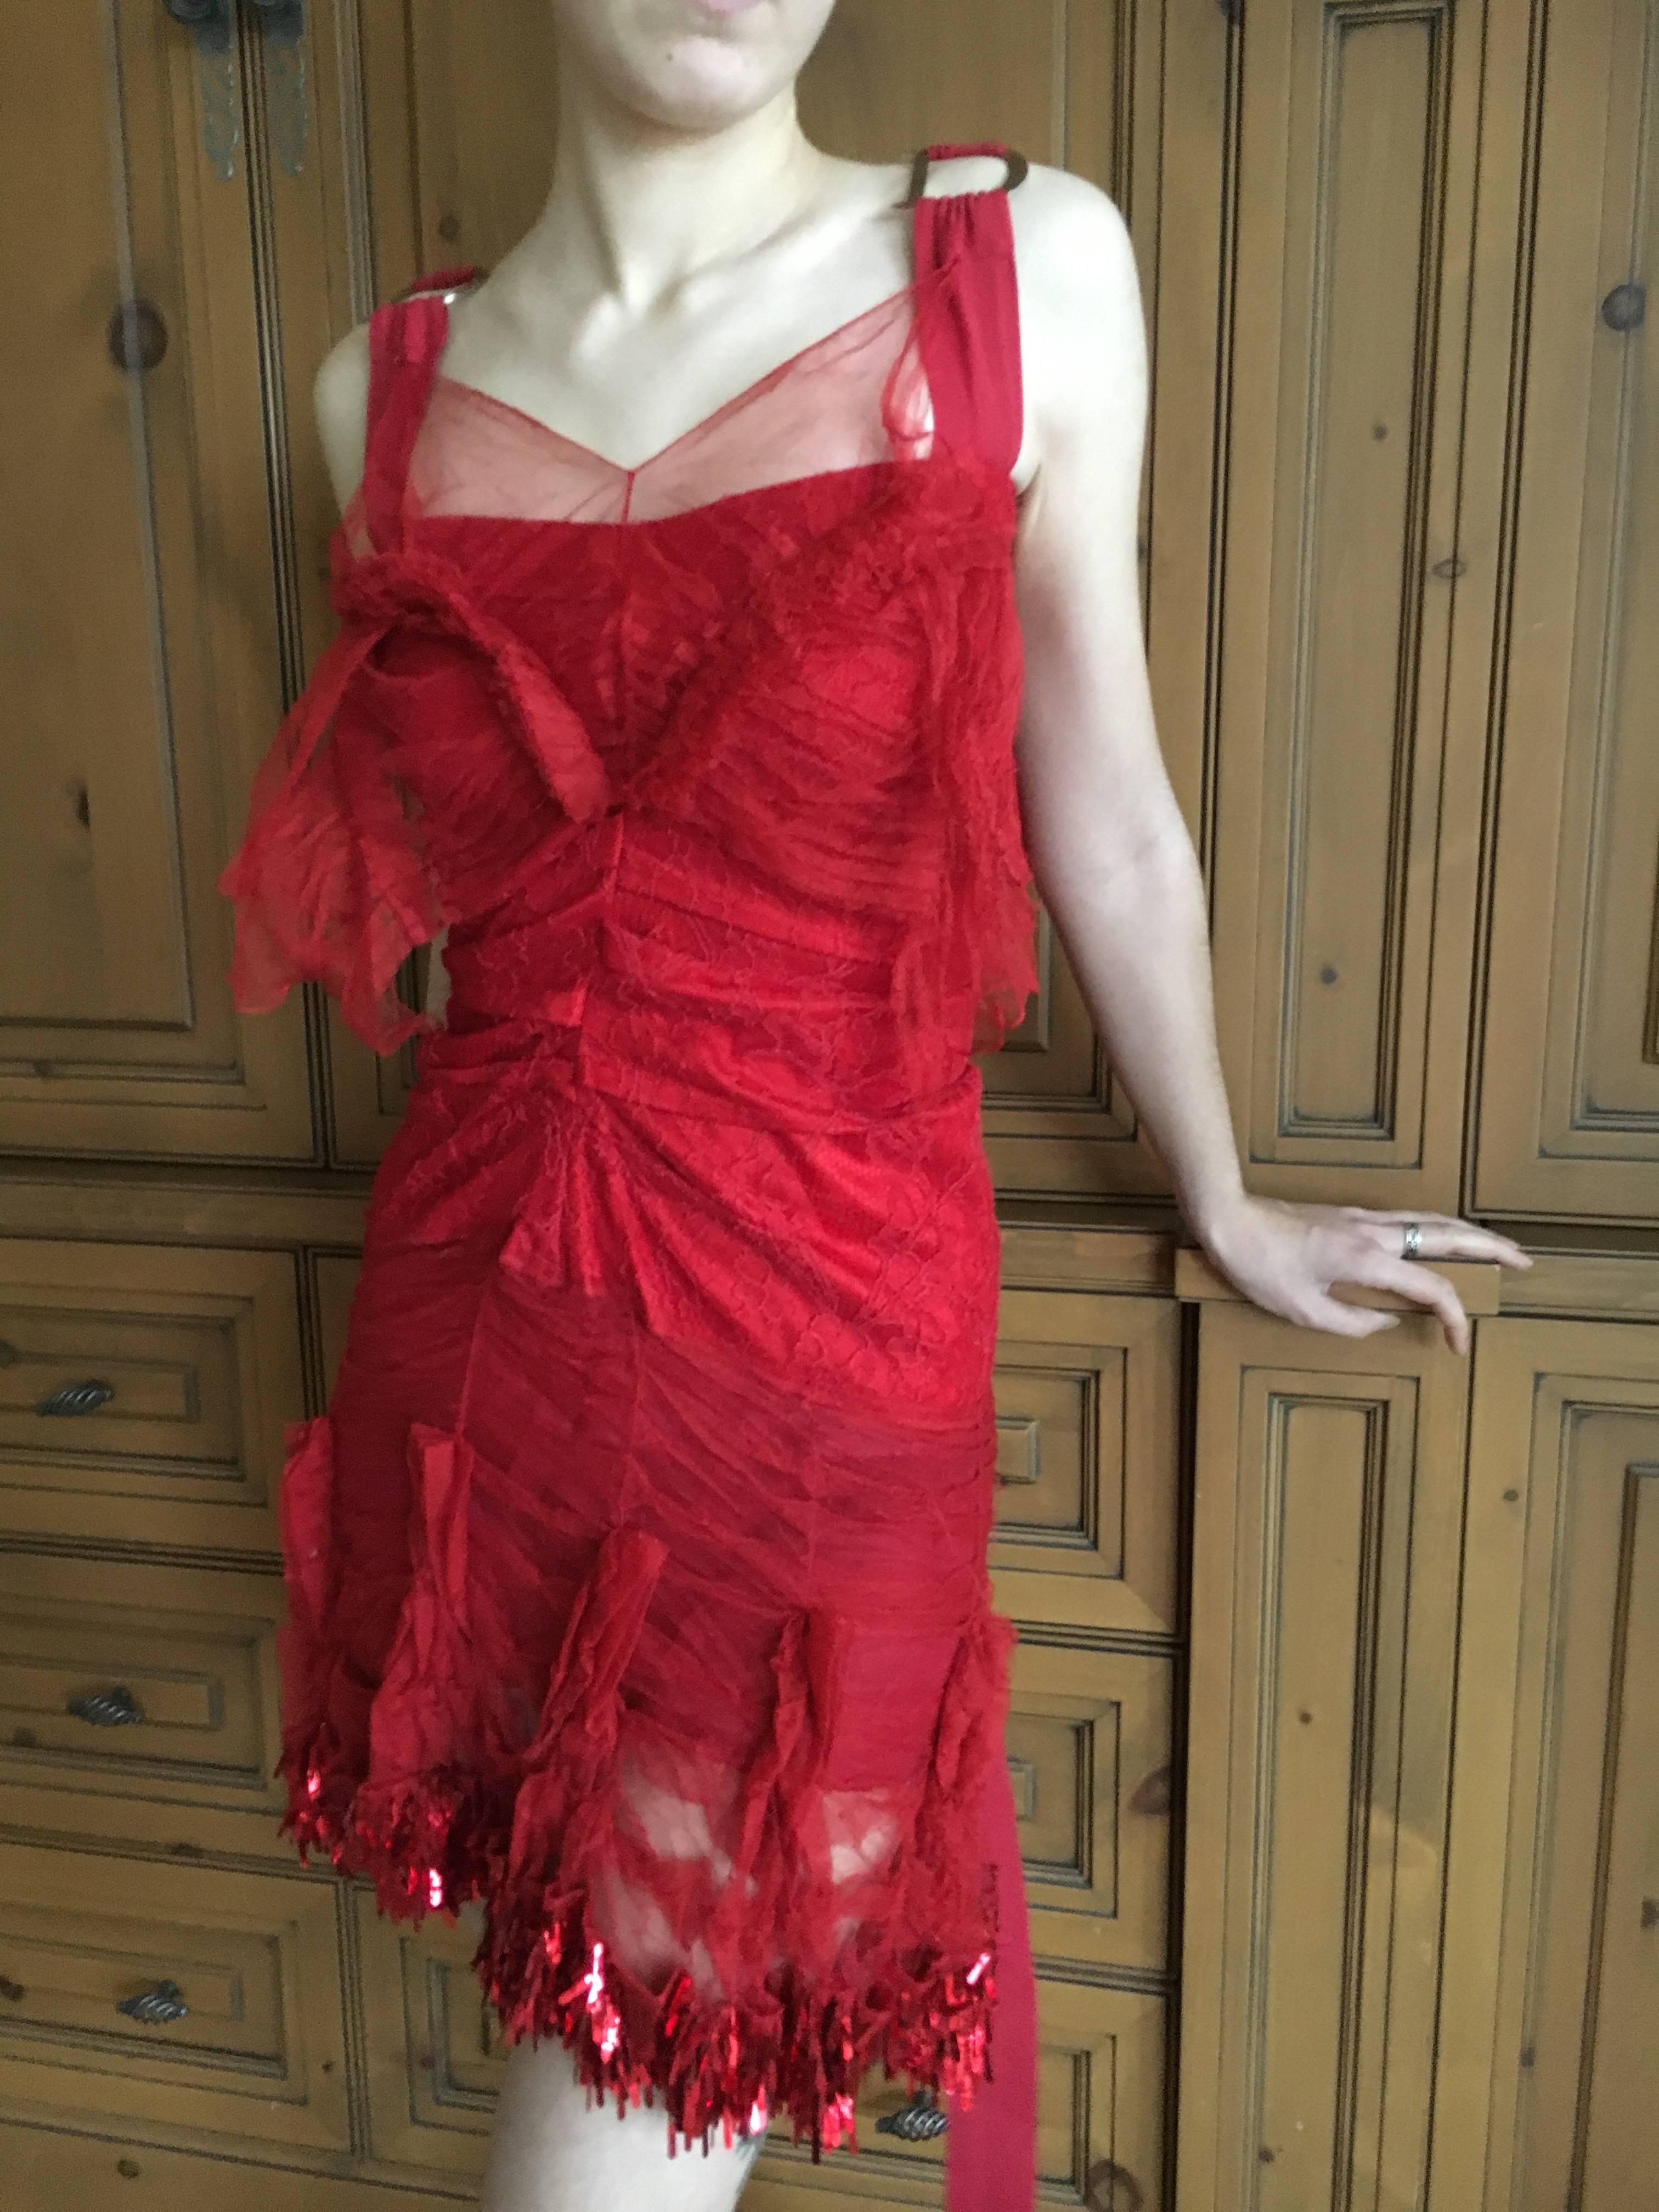 Beautiful red lace cocktail dress by John Galliano for Christian Dior.
Trimmed with red paillete sequins at the hem, with large 